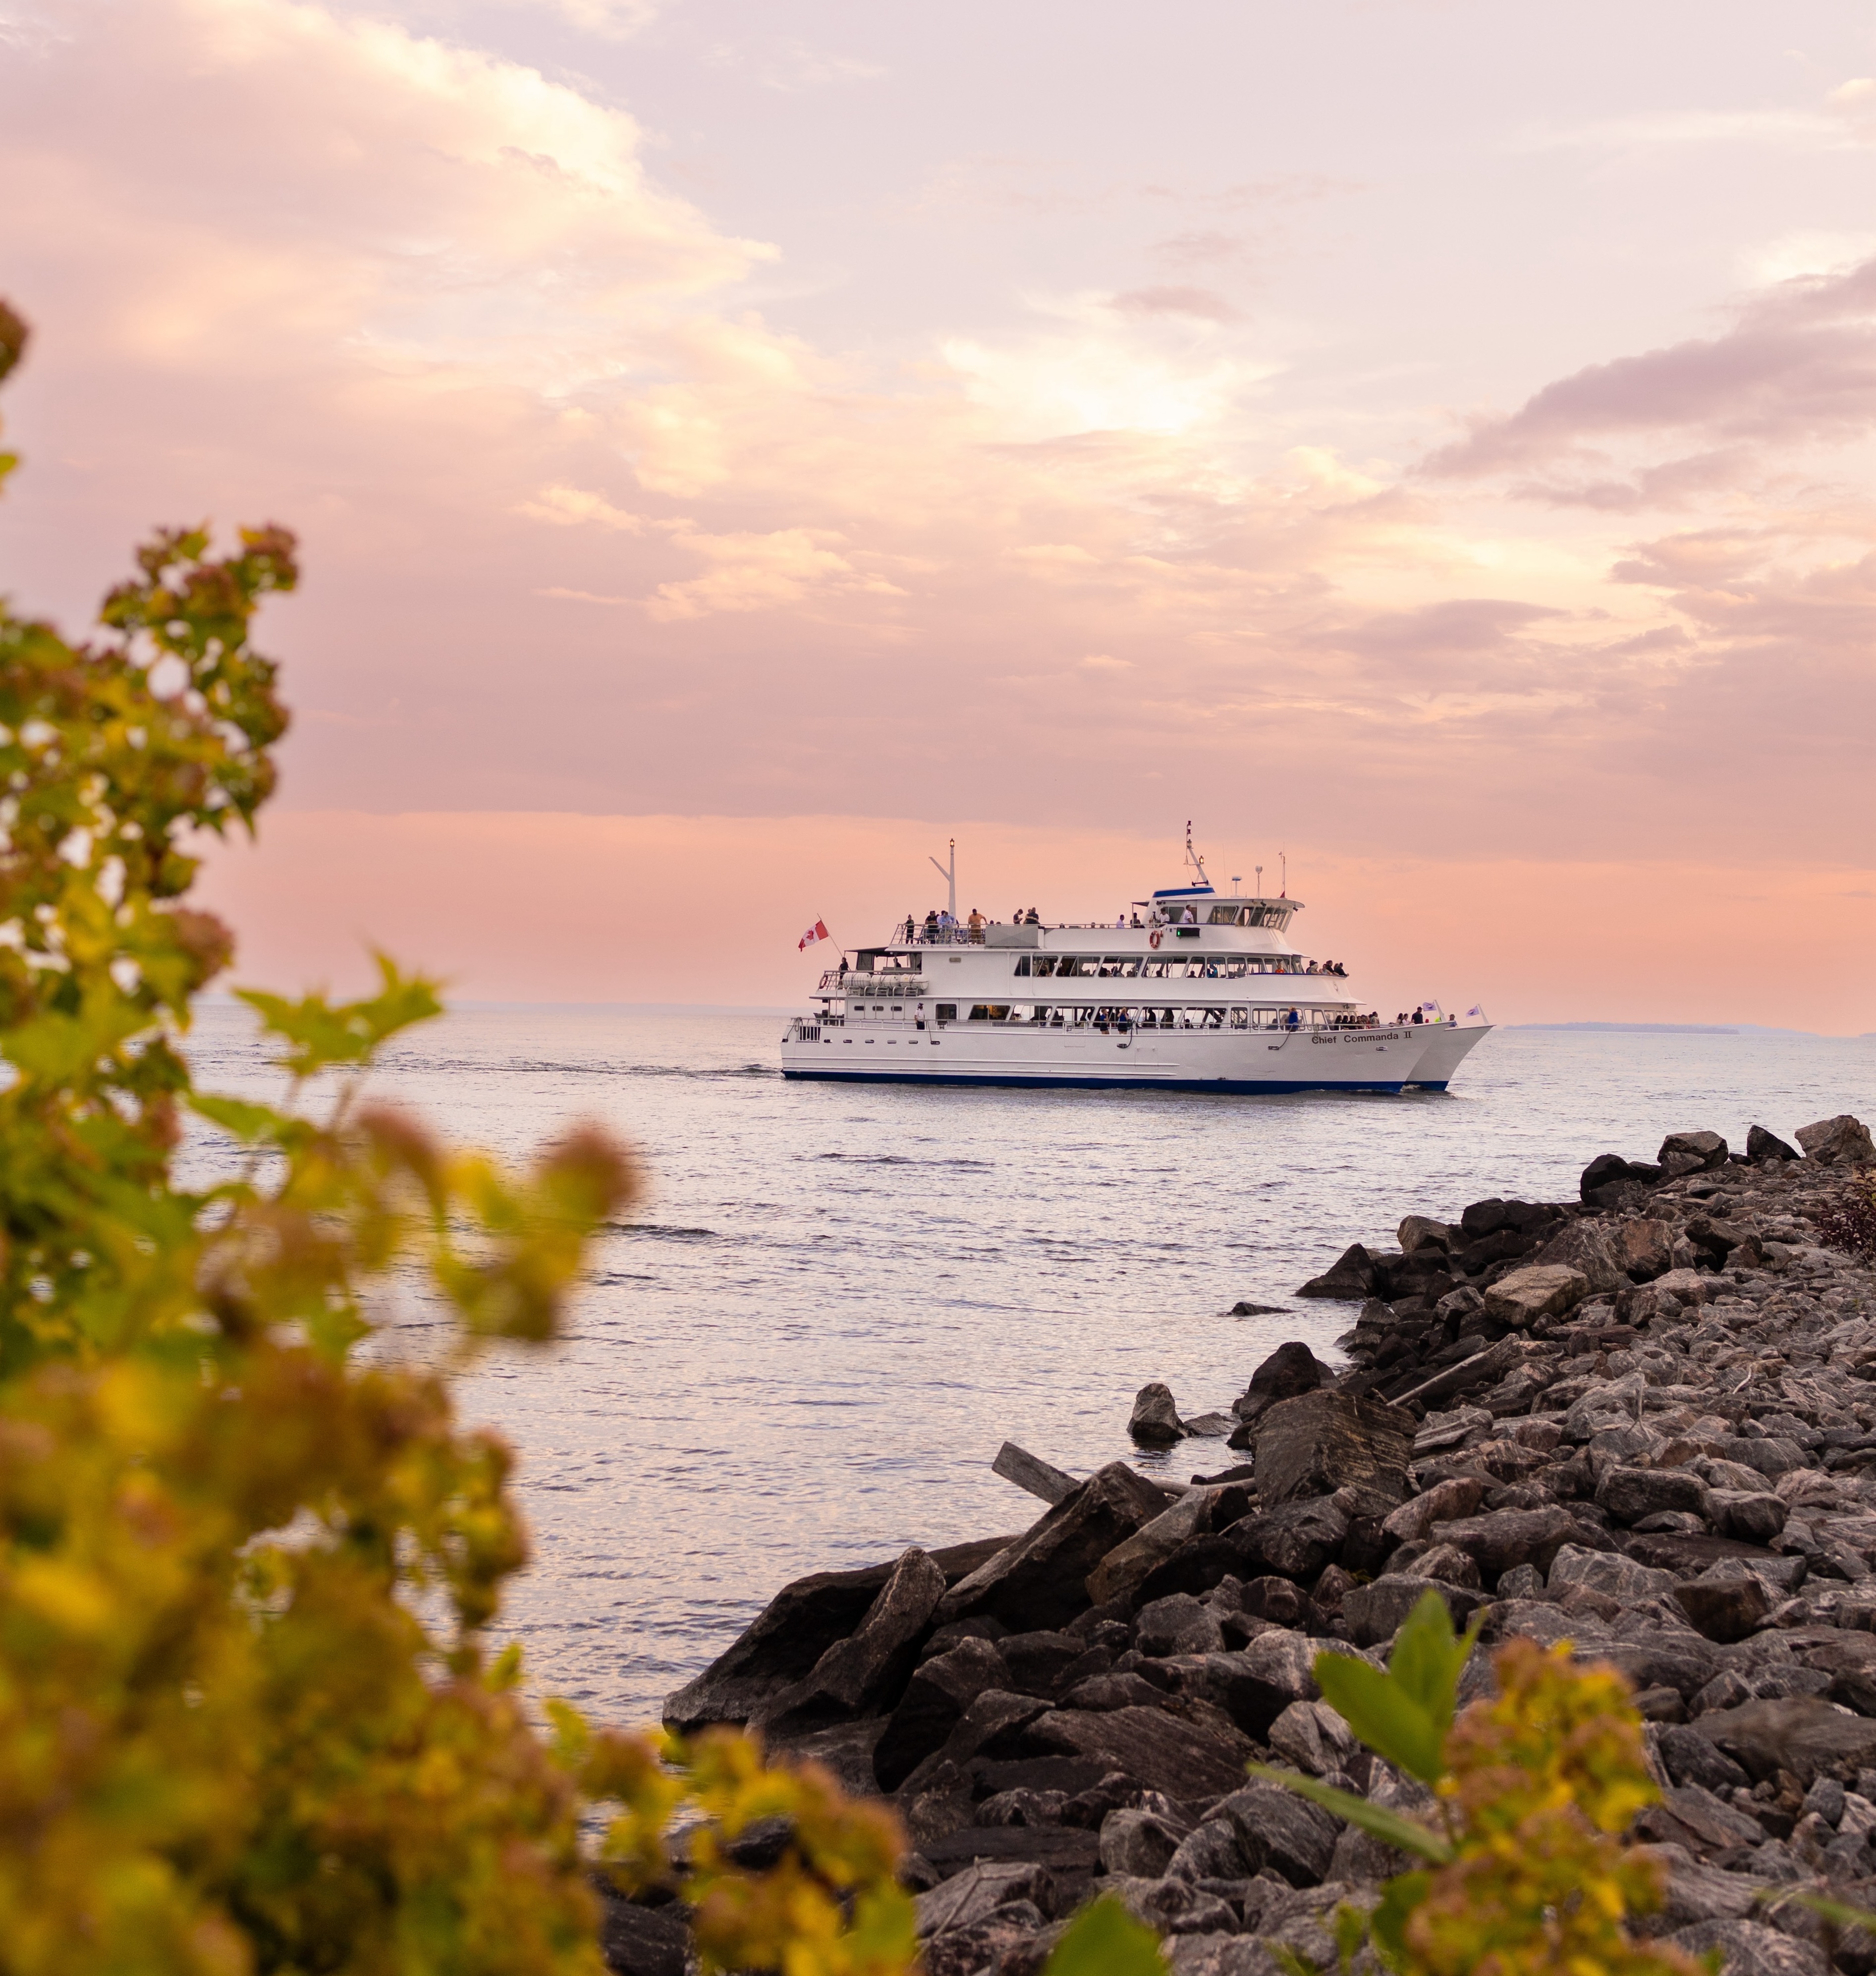 The Chief Commanda 2; a large passenger cruise ship sailing in the distance on Lake Nipissing, the sky beautifully lit by a delicate pink sunset. Green foliage and a rocky shore are in the foreground.